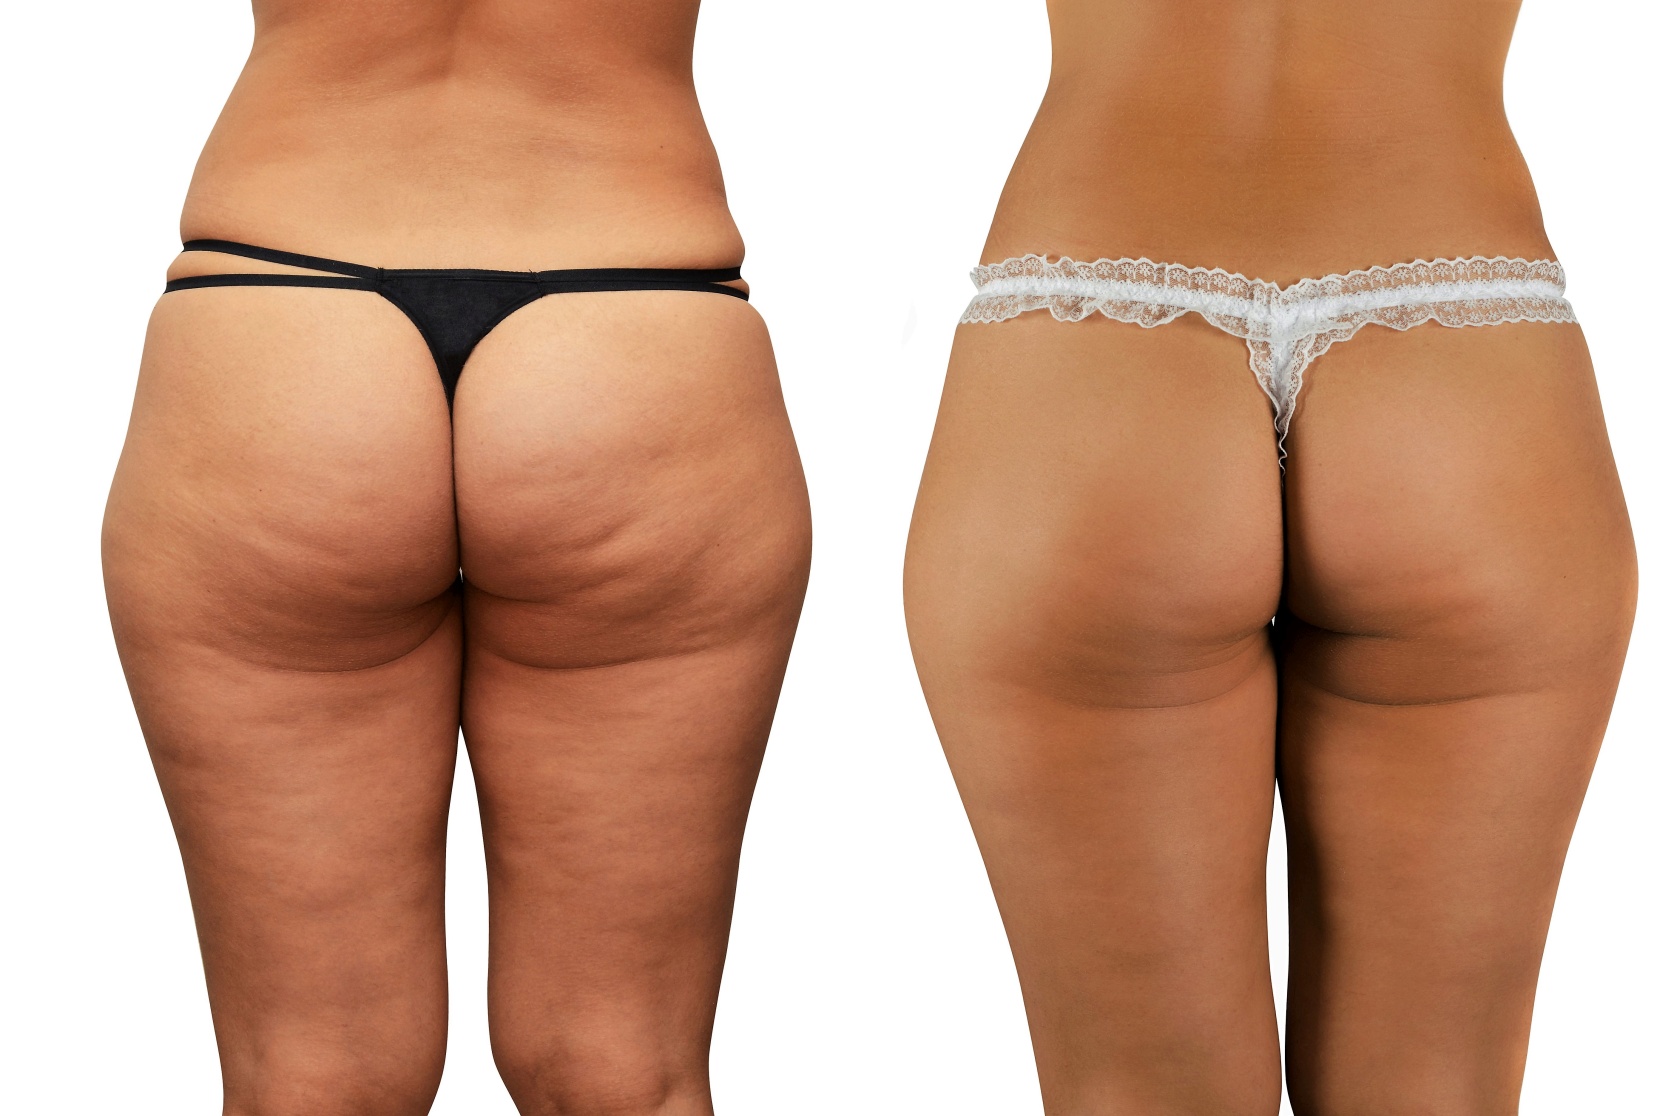 Example of cellulite treatment (before and after)